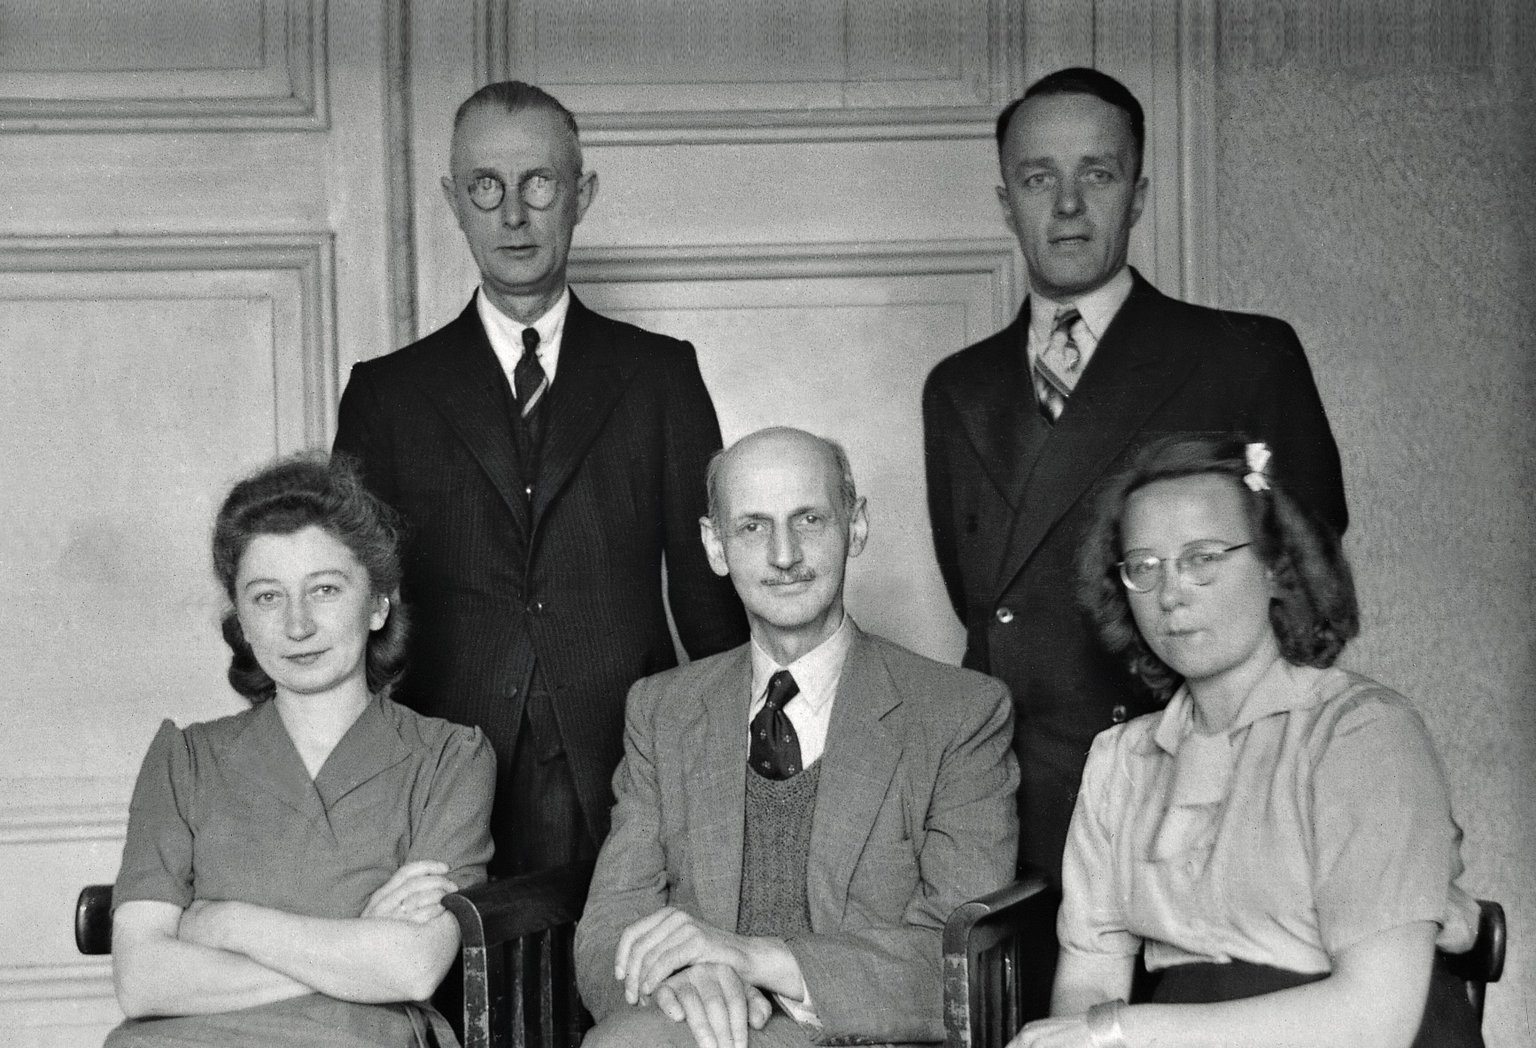 Otto Frank with the helpers in the office at Prinsengracht 263, October 1945. From left to right: Miep Gies, Johannes Kleiman, Otto Frank, Victor Kugler, and Bep Voskuijl.